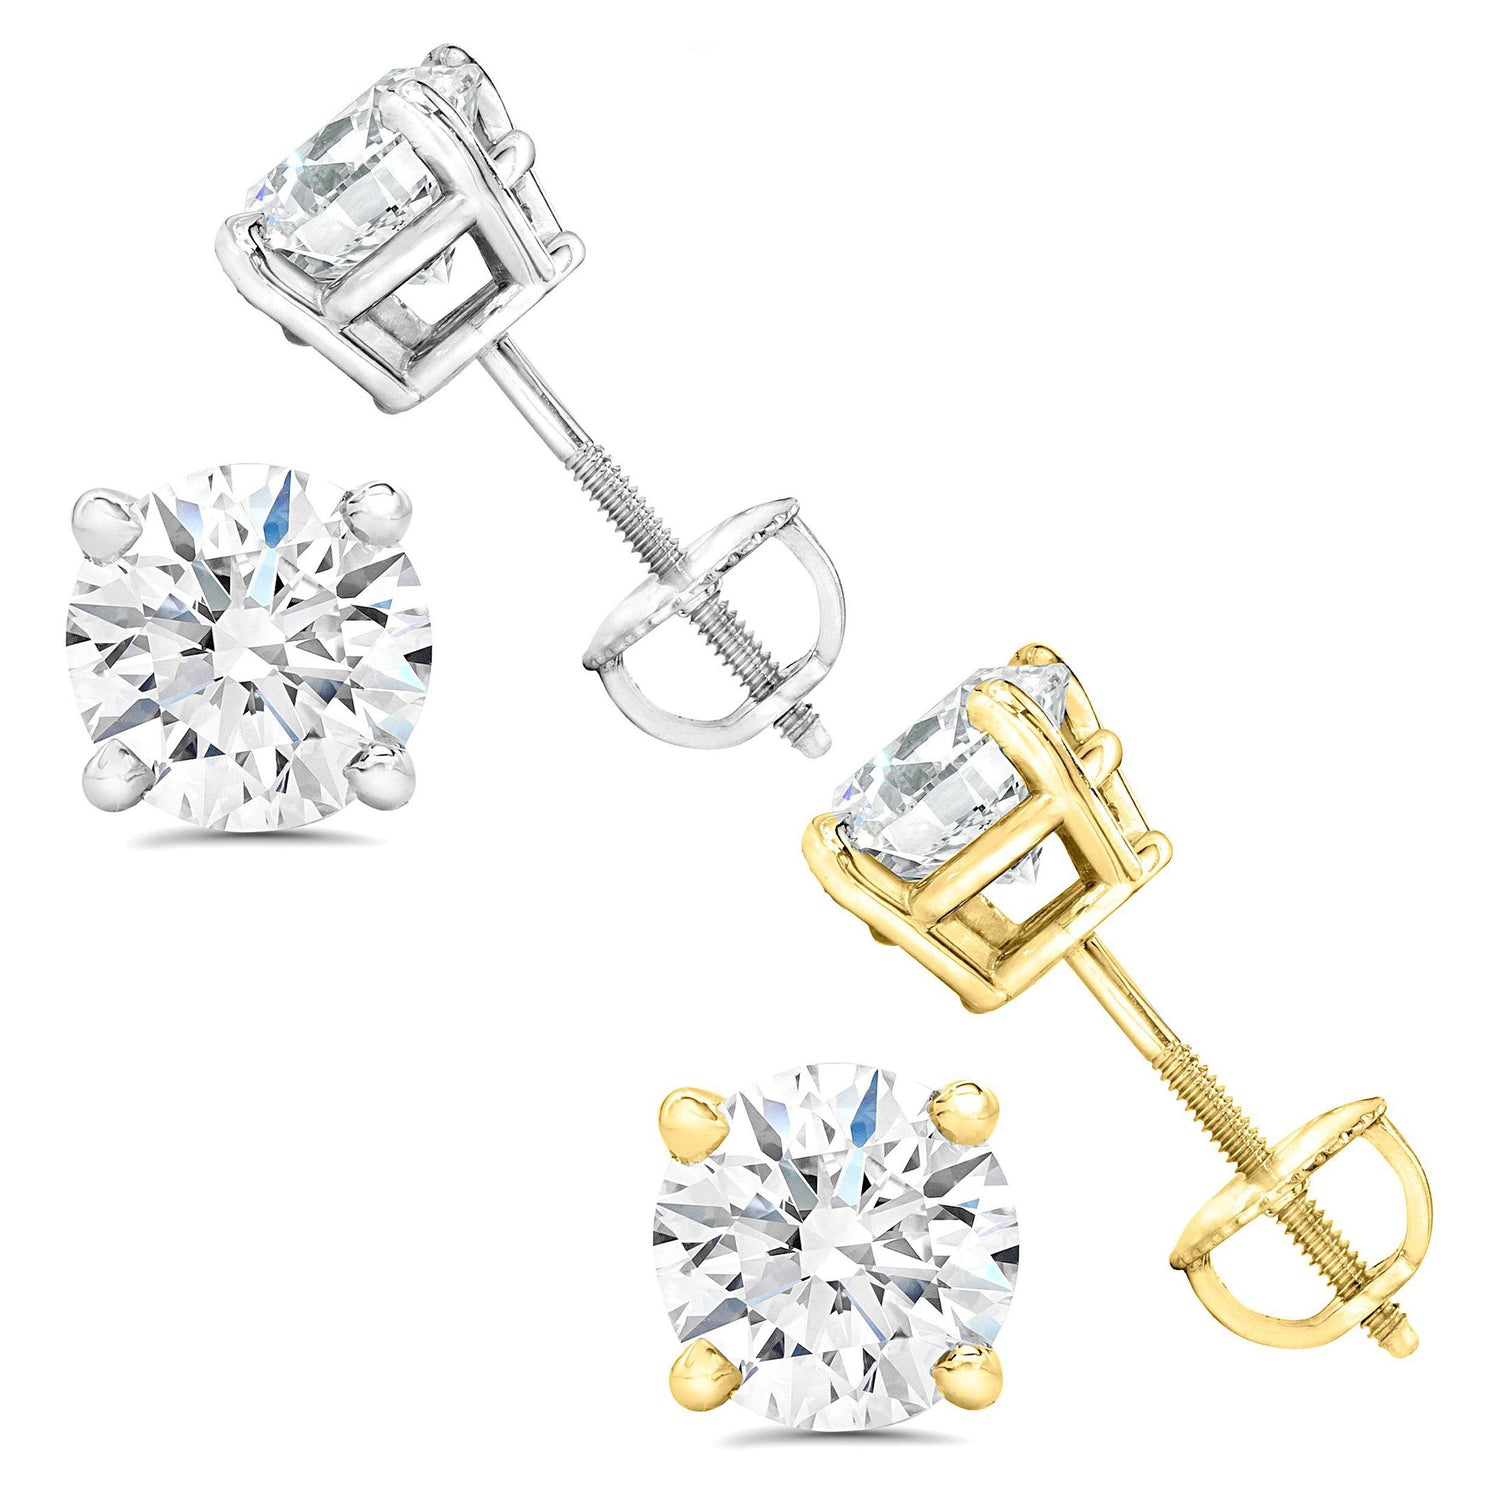 Diamond Stud Earrings - Superior Quality in Yellow Gold 1/20 CT to 1 CT T.W.